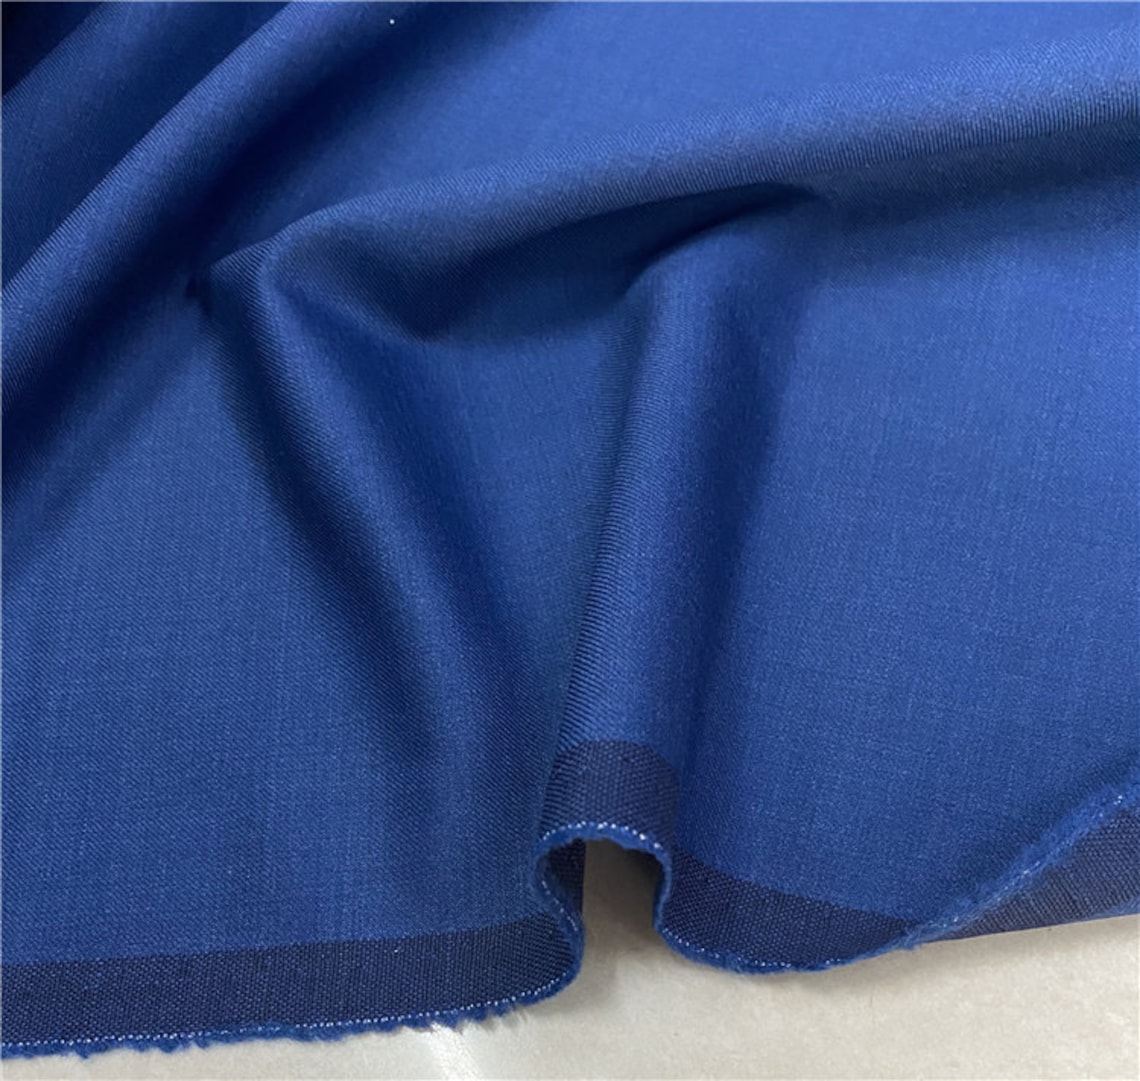 Italian fabric blue worsted wool fabric by the yard | Etsy